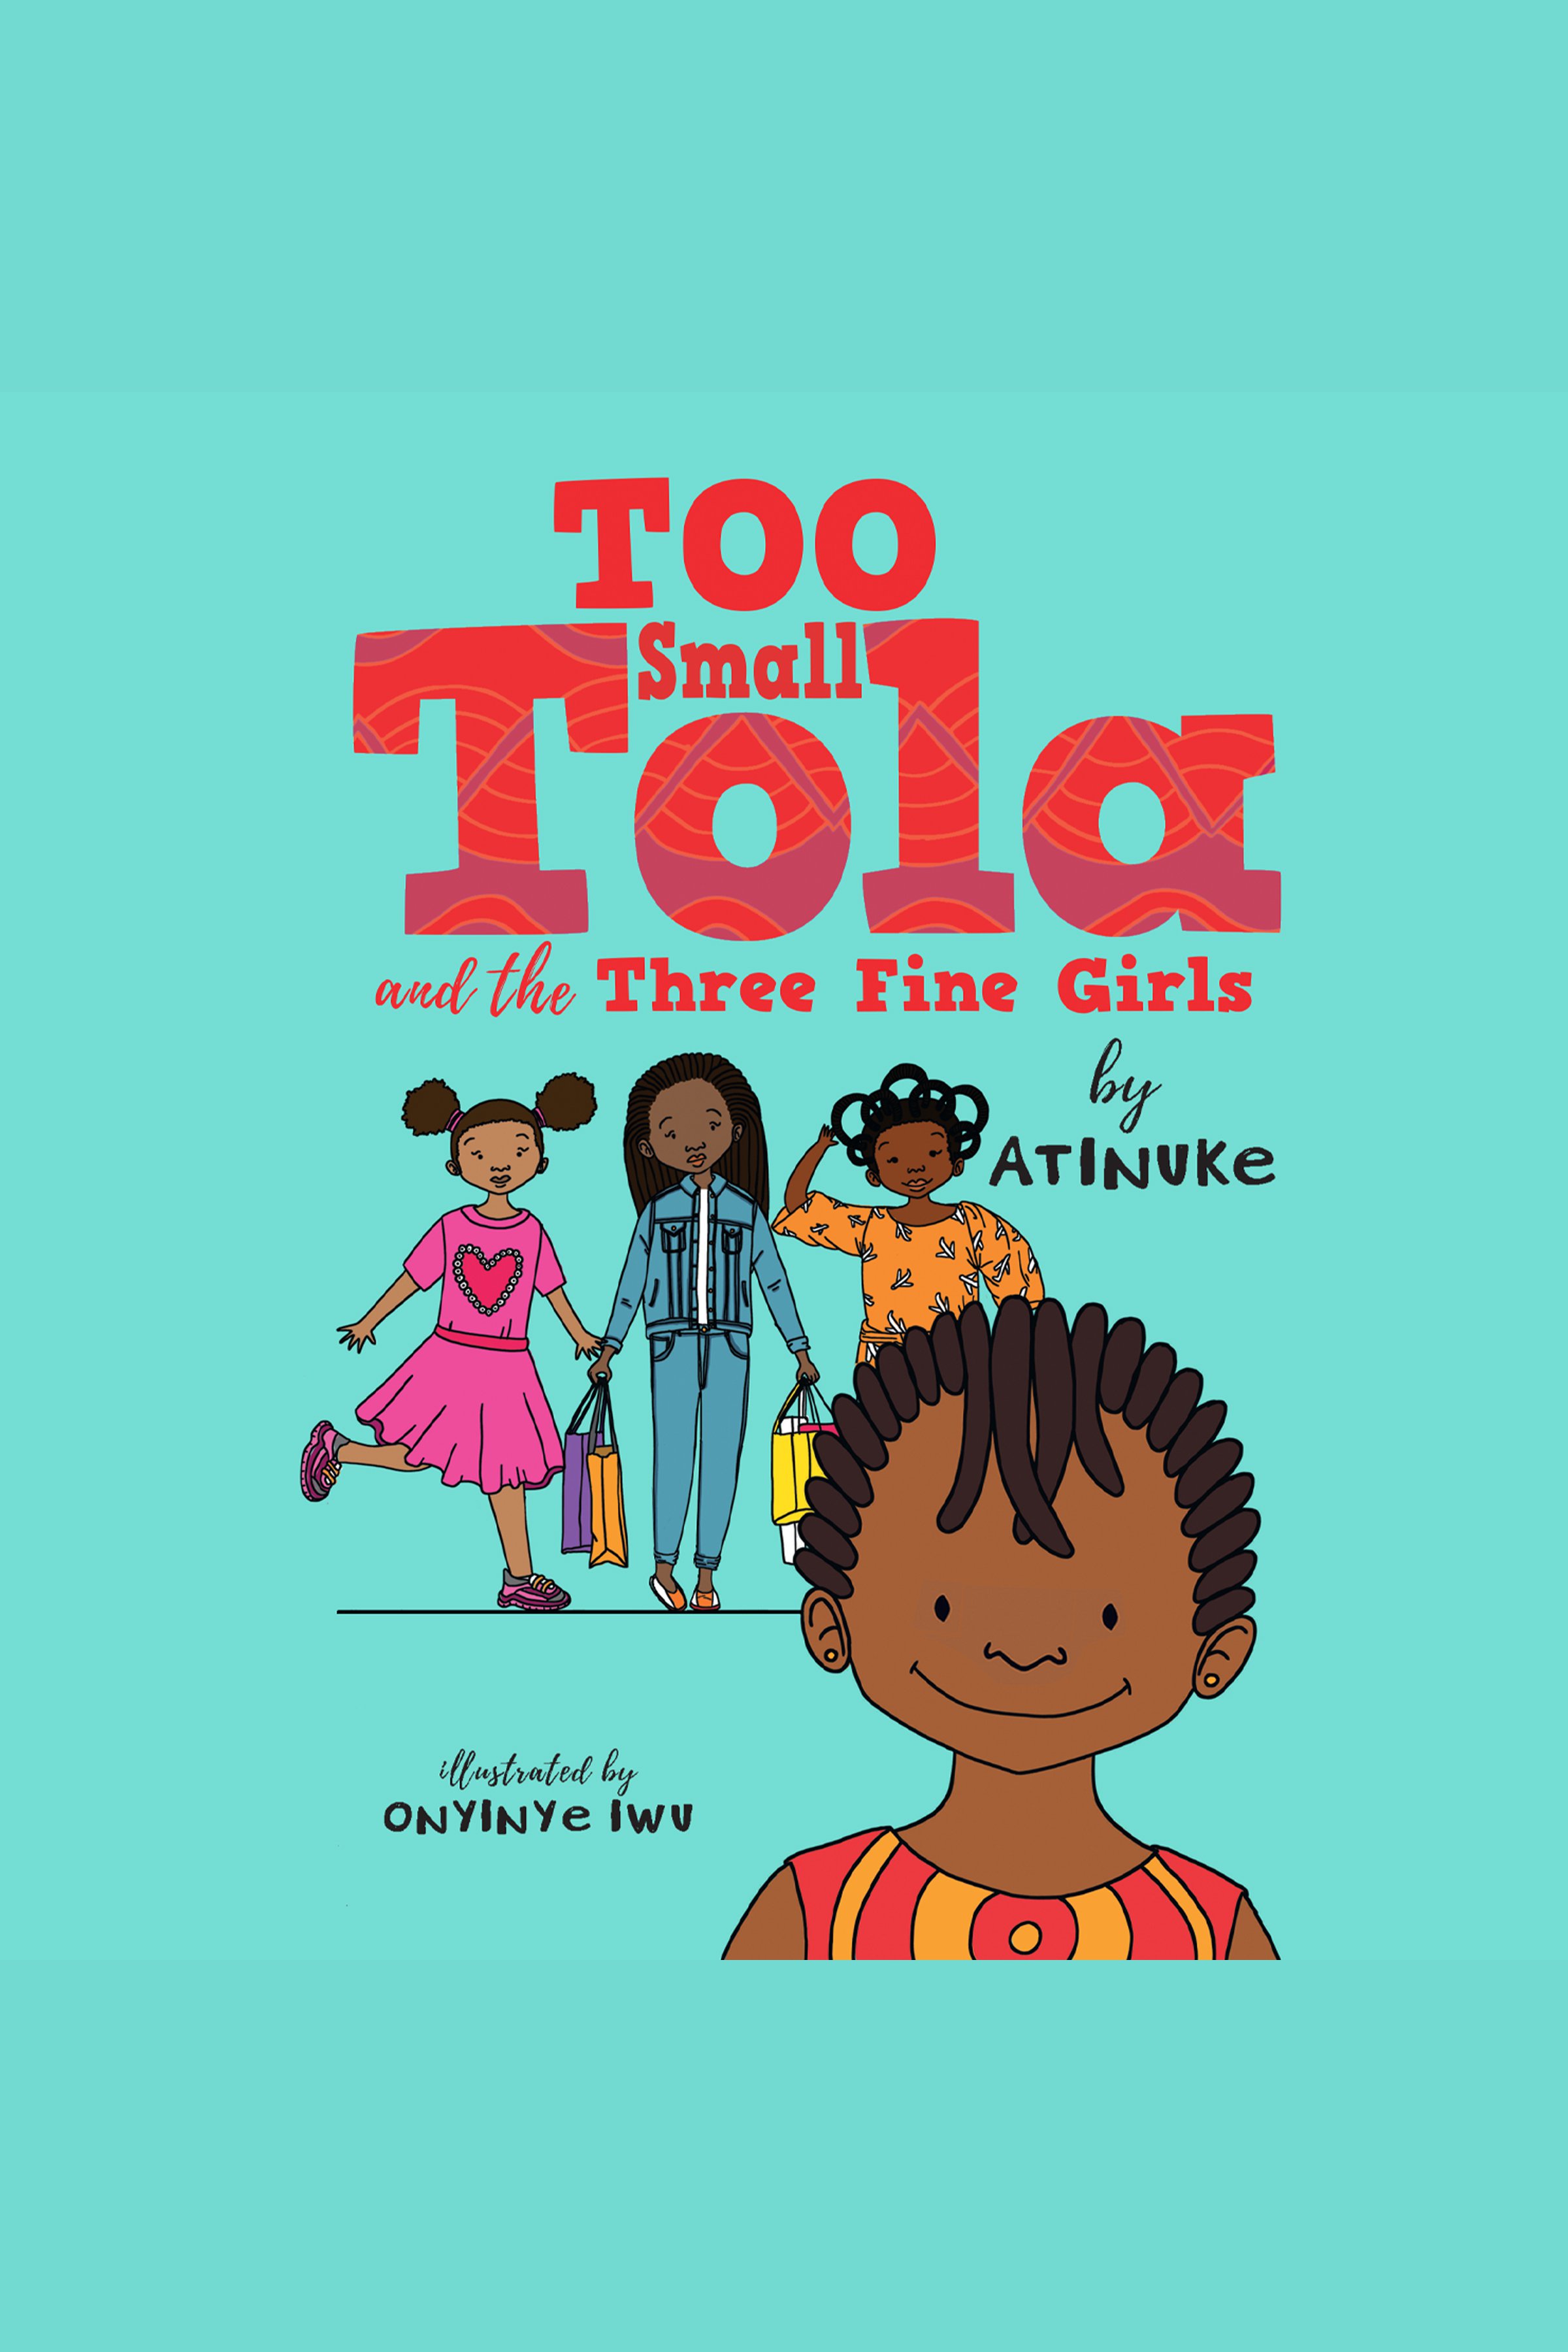 Too Small Tola and the Three Fine Girls cover image